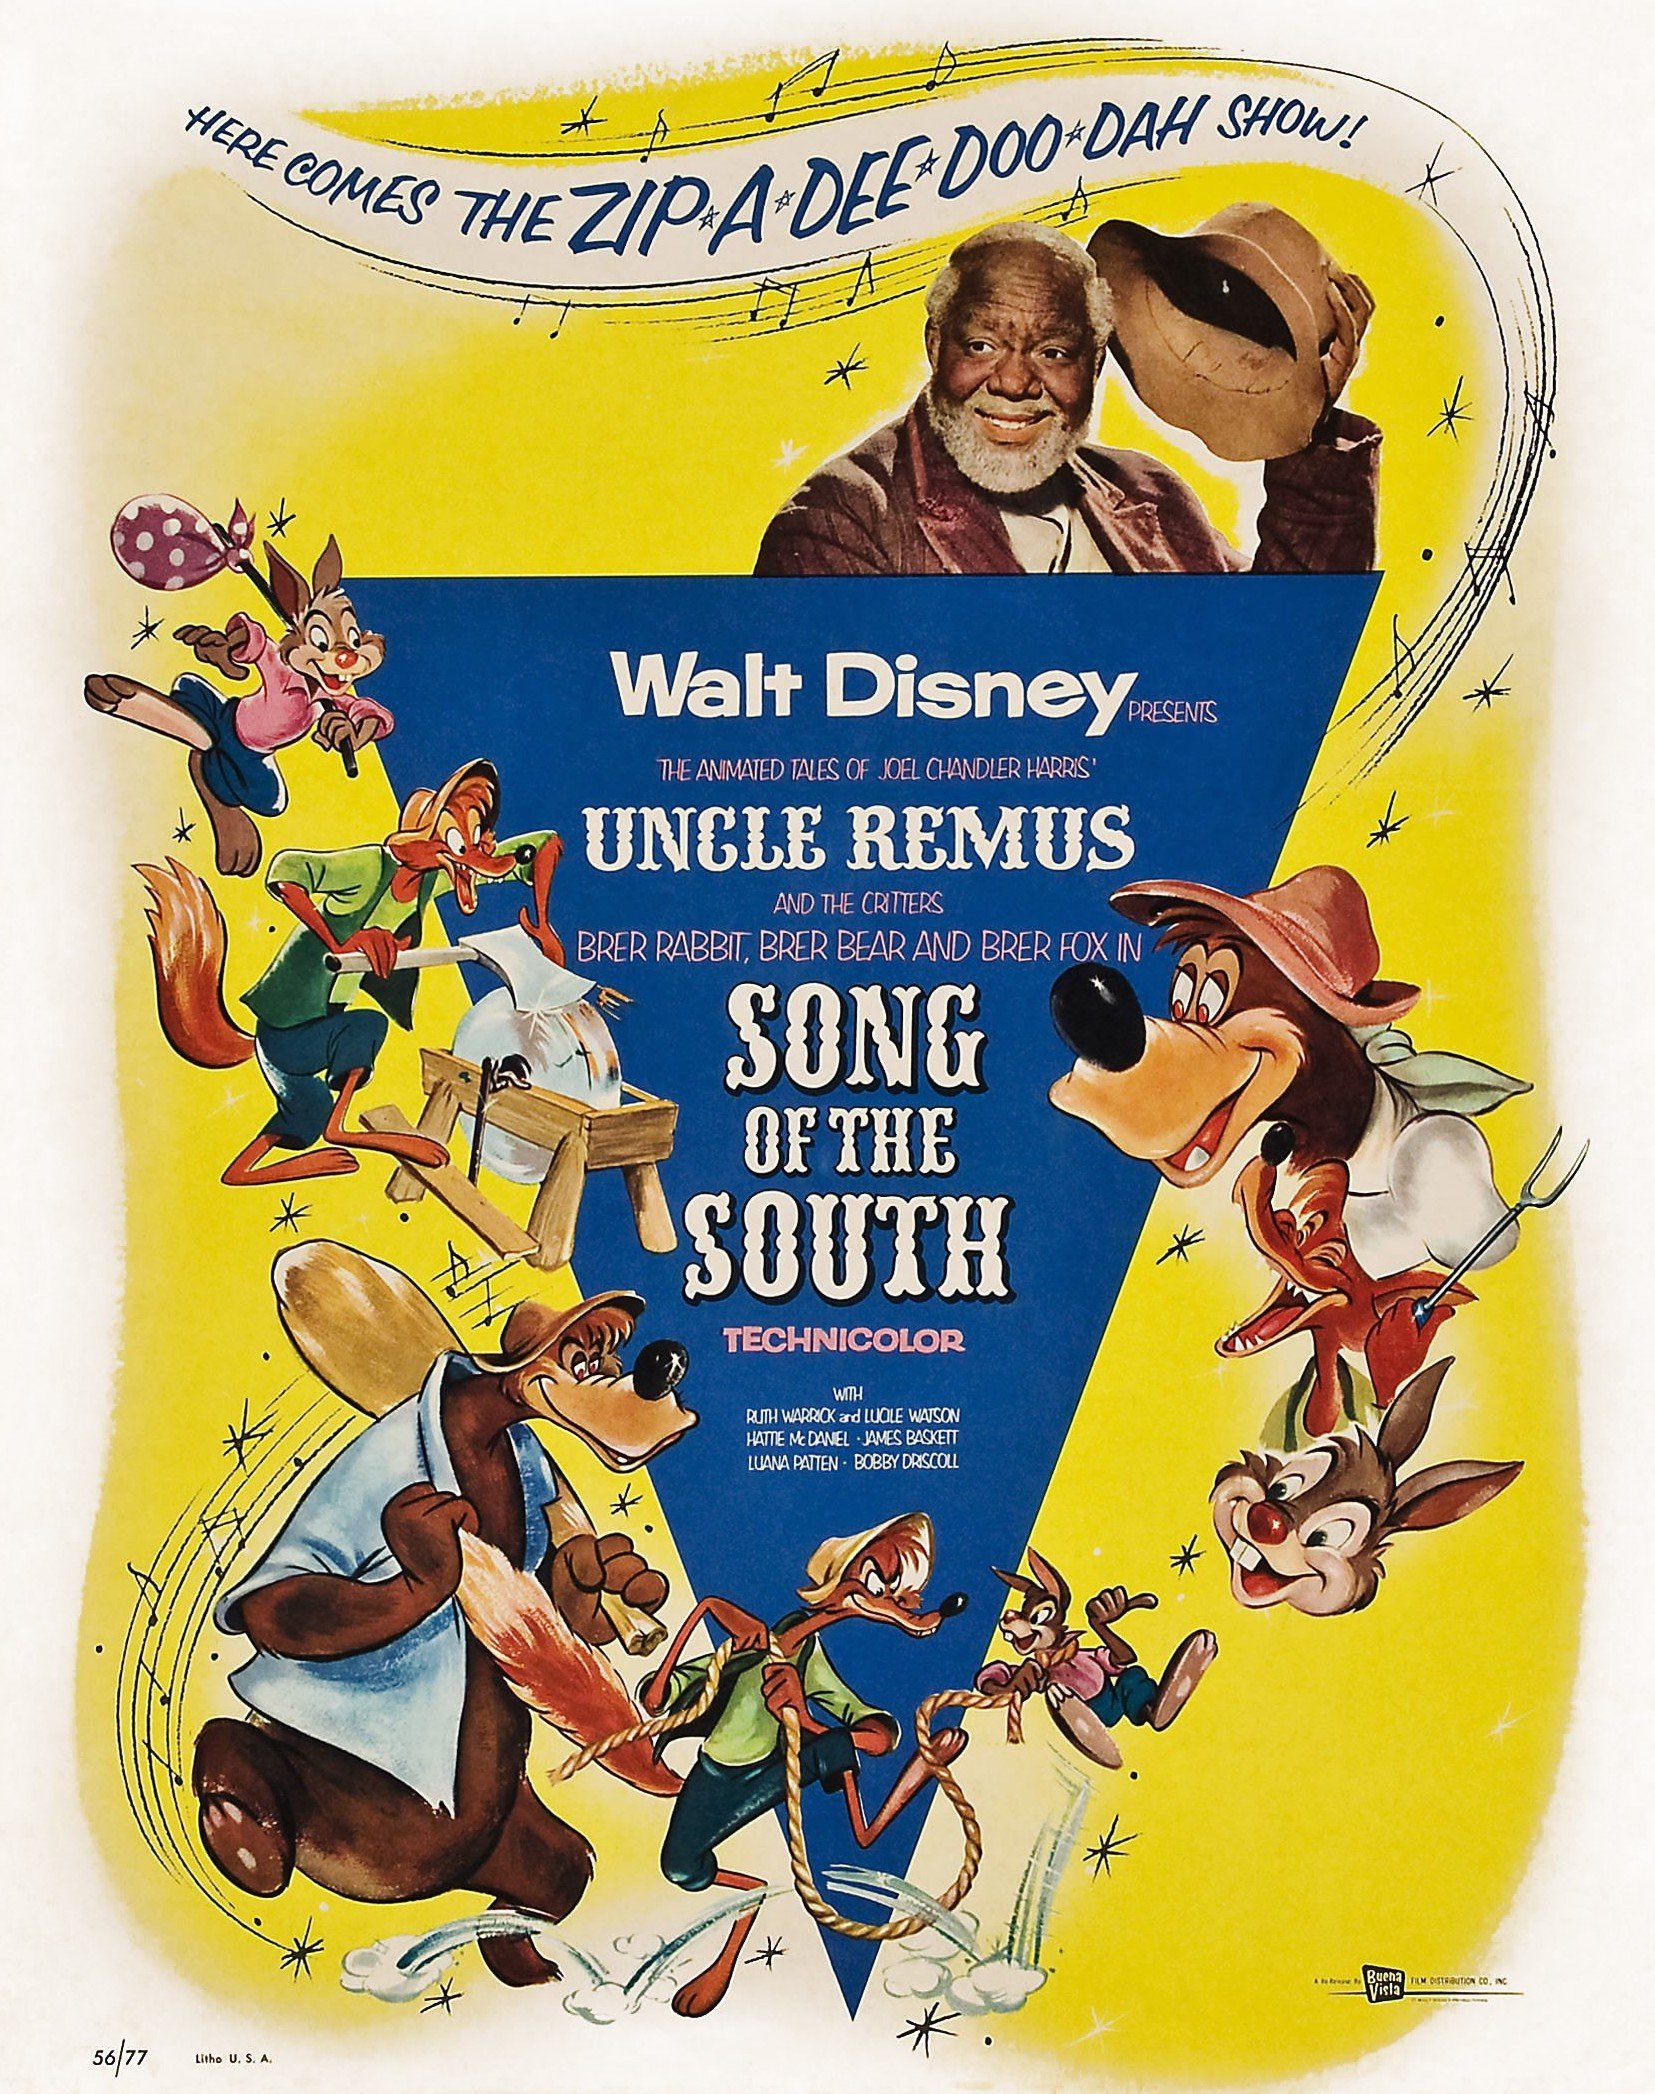 'Song Of The South' poster with James Baskett on top, who played Uncle Remus.